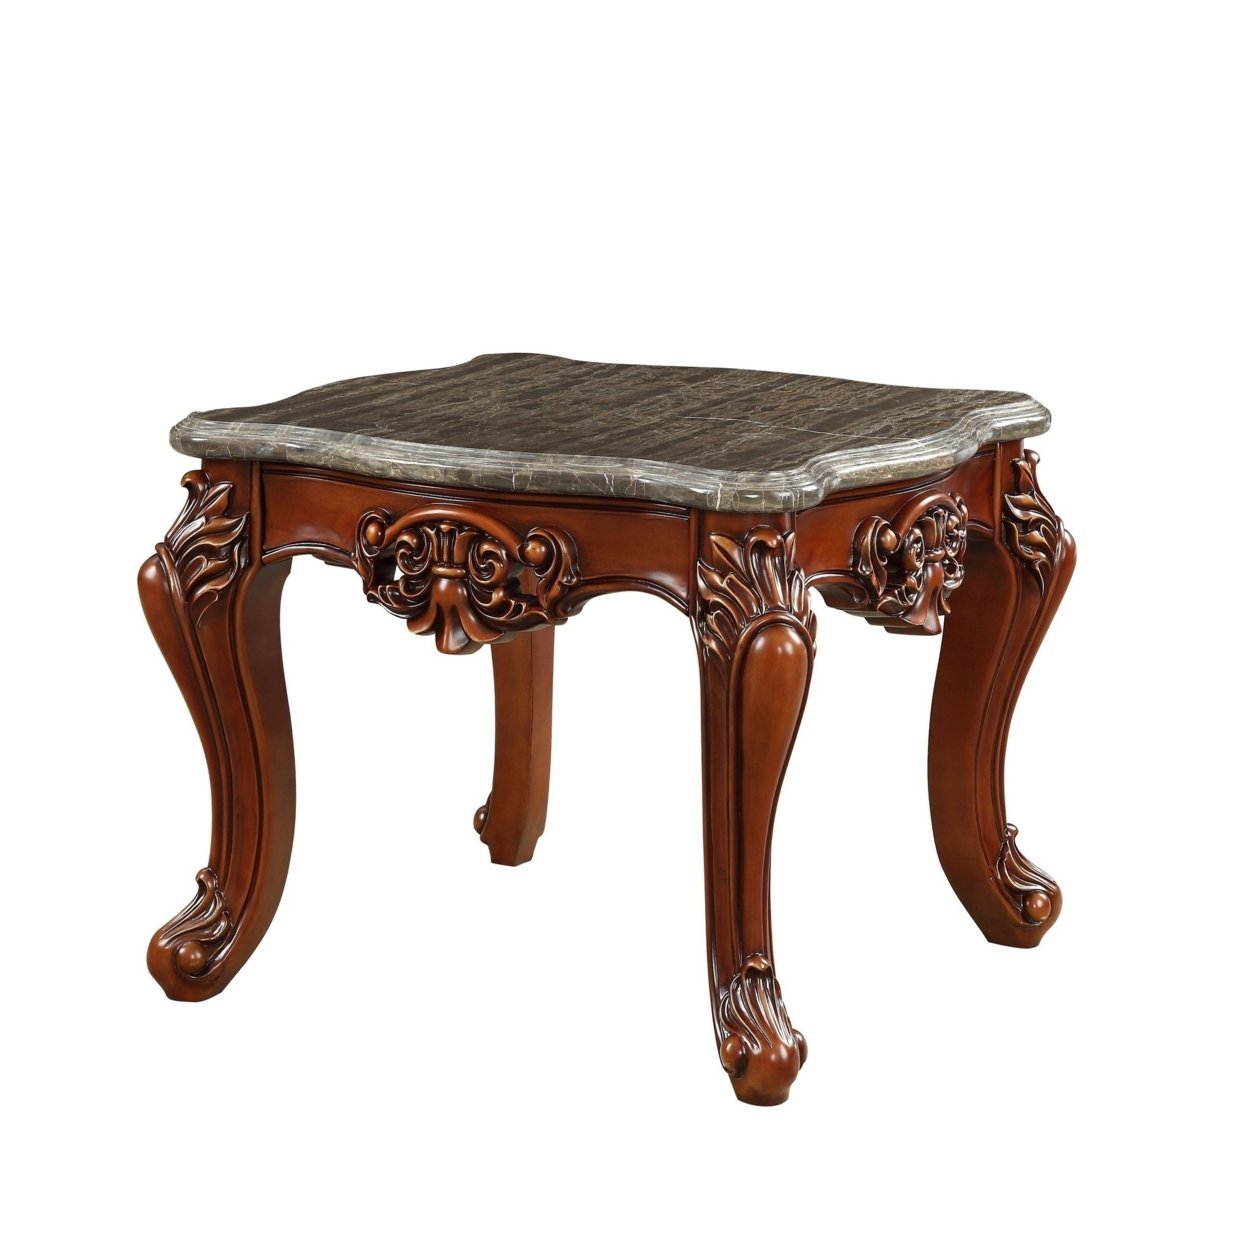 30 Inch Classic Square Marble Top End Table, Cabriole Legs, Gray, Brown- Saltoro Sherpi